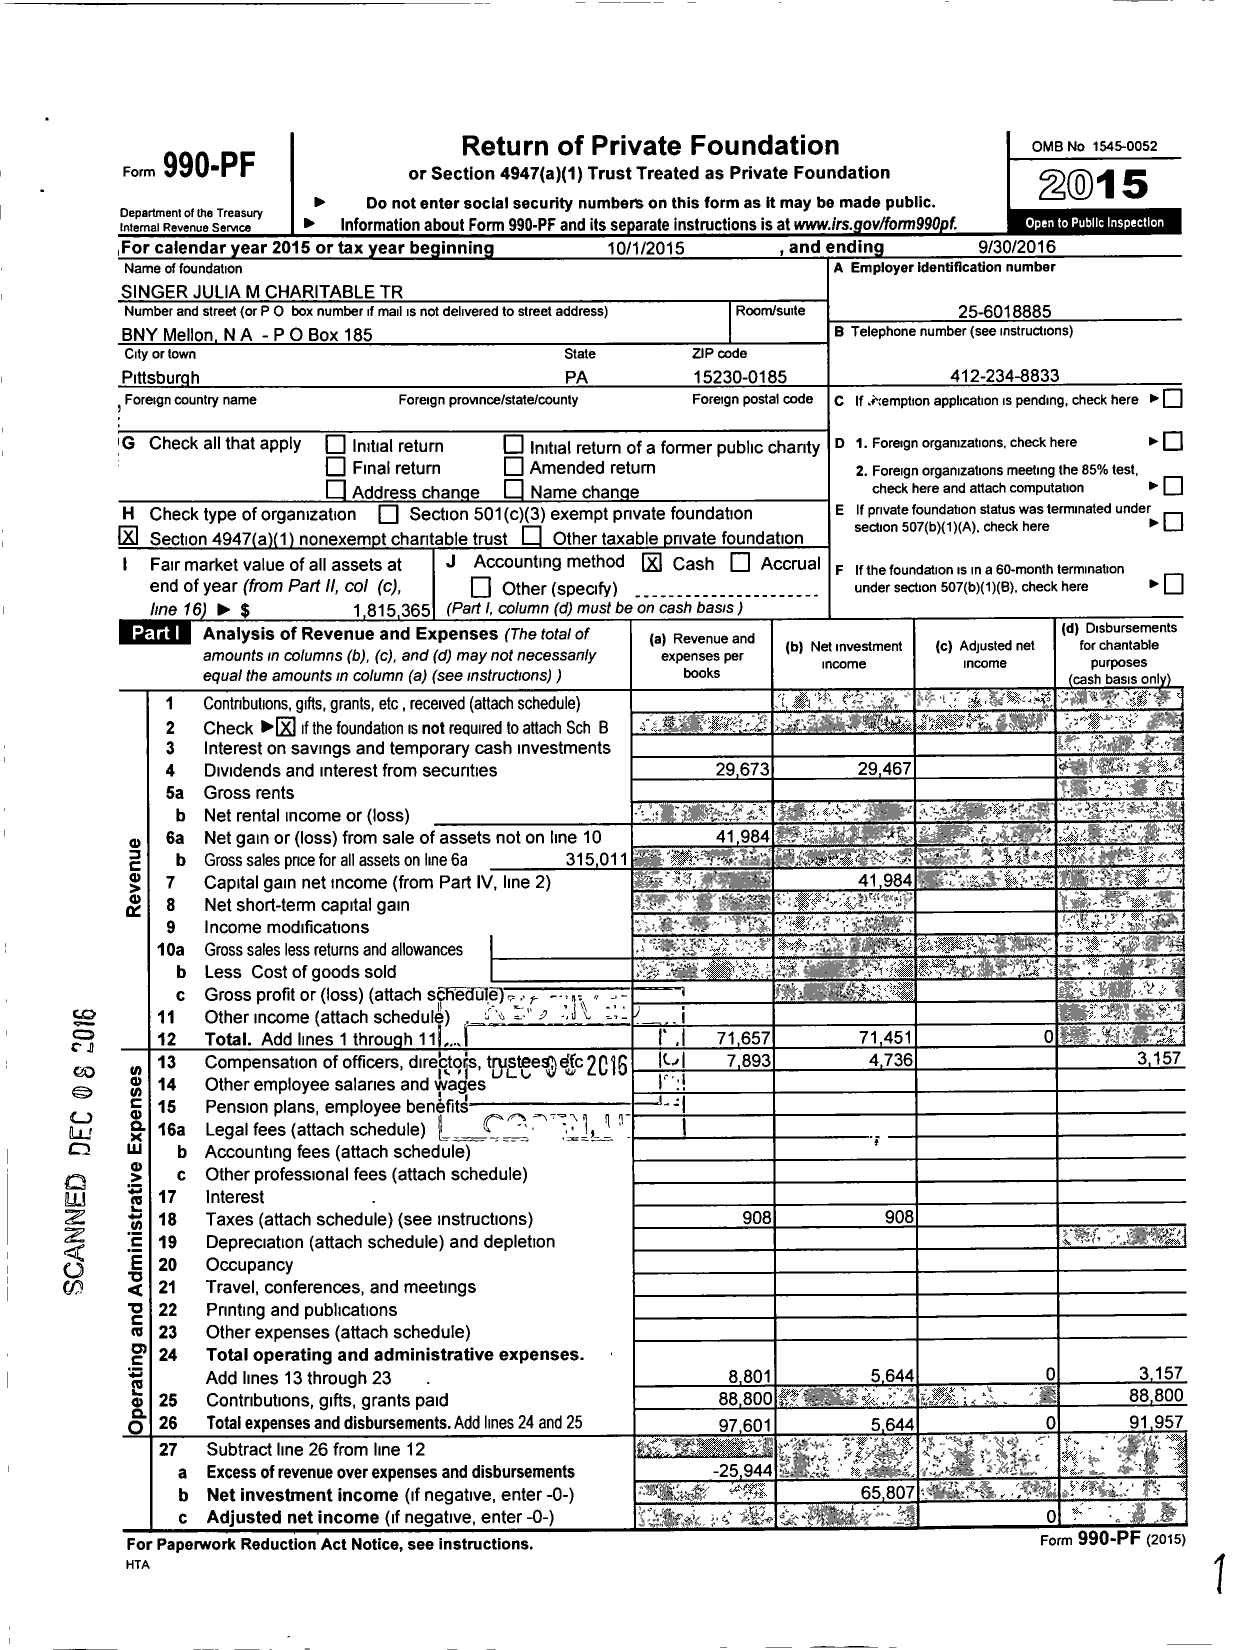 Image of first page of 2015 Form 990PF for Singer Julia M Charitable Trust